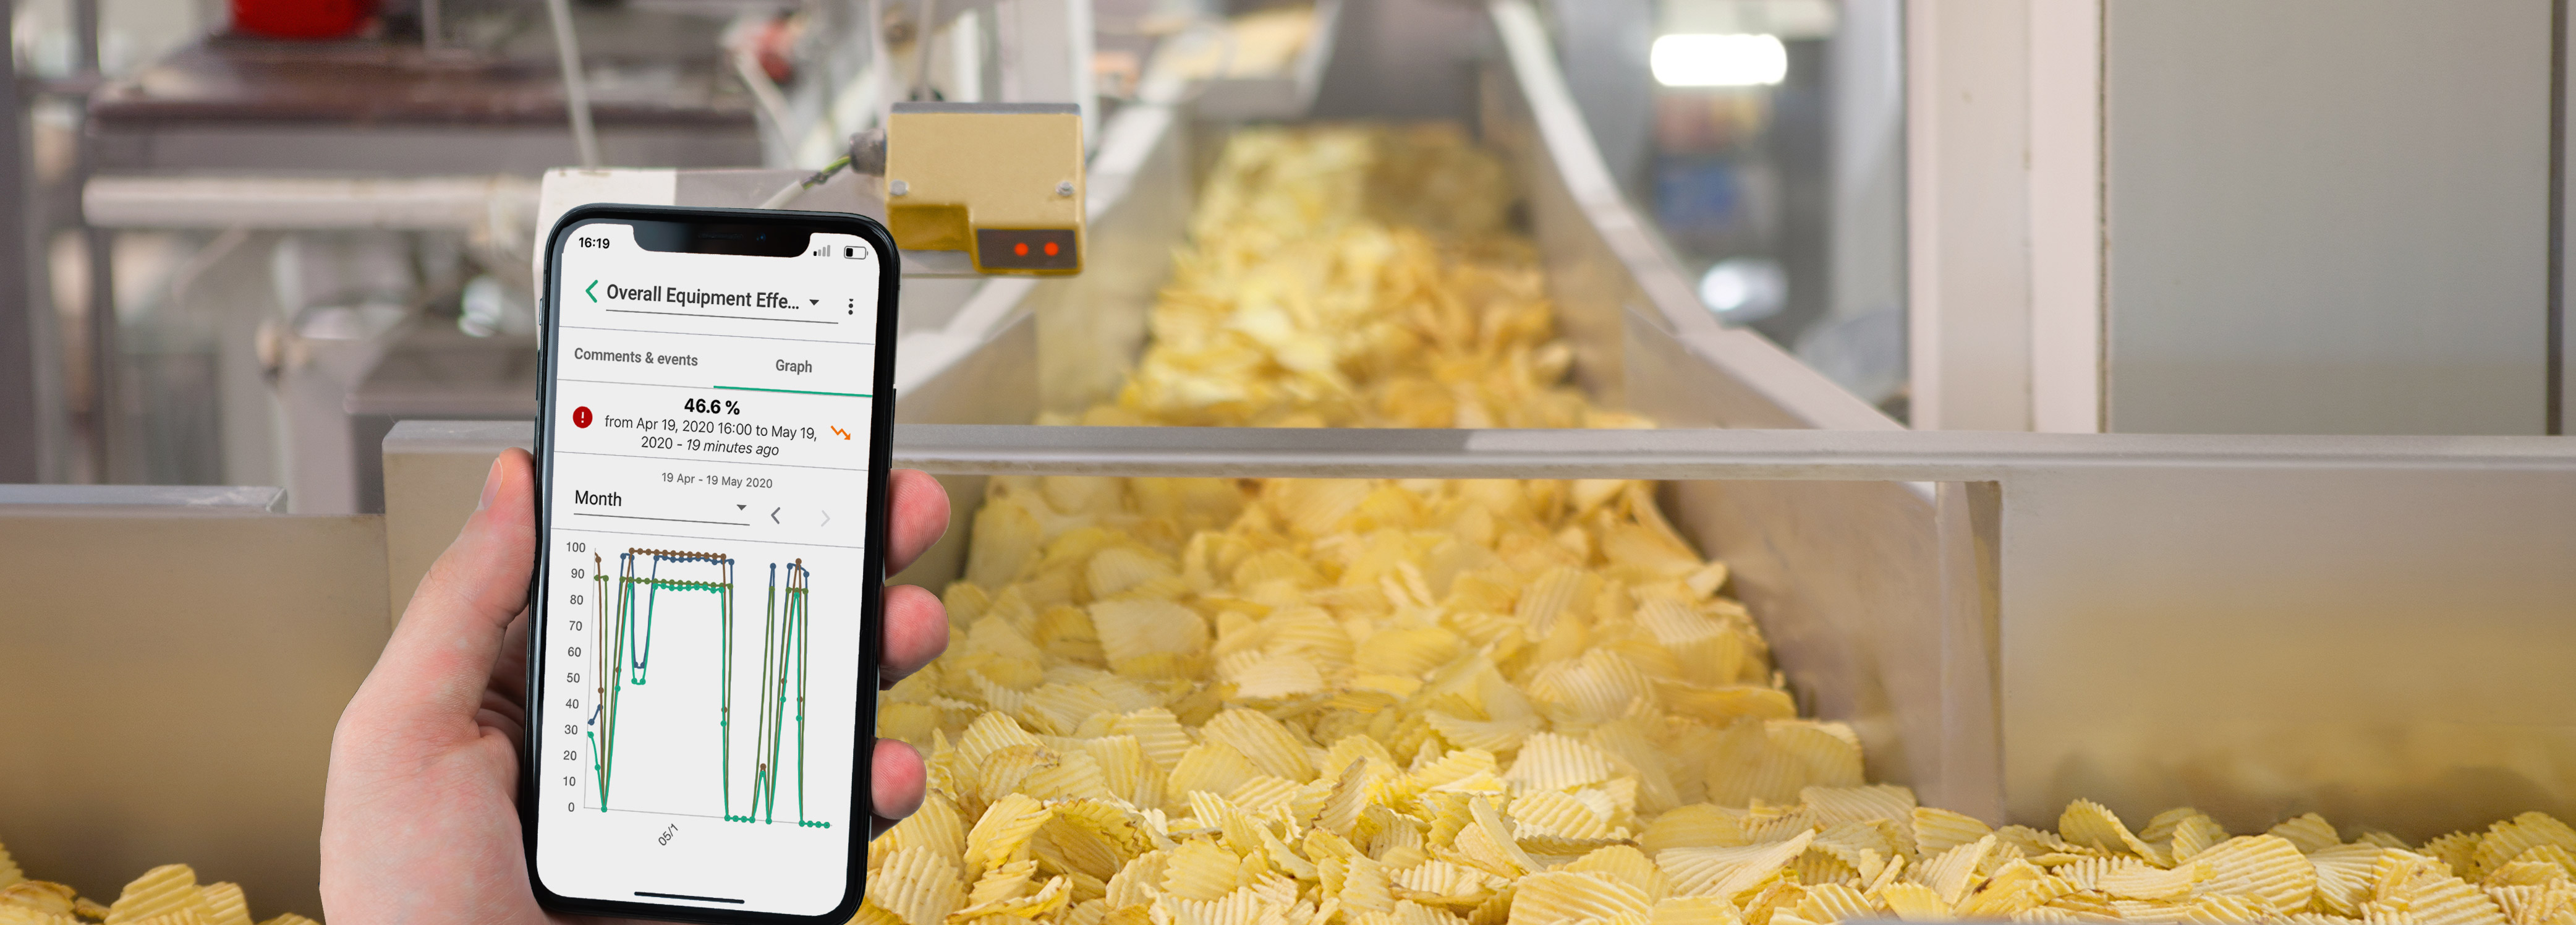 Food production line being monitored by real-time OEE on a mobile